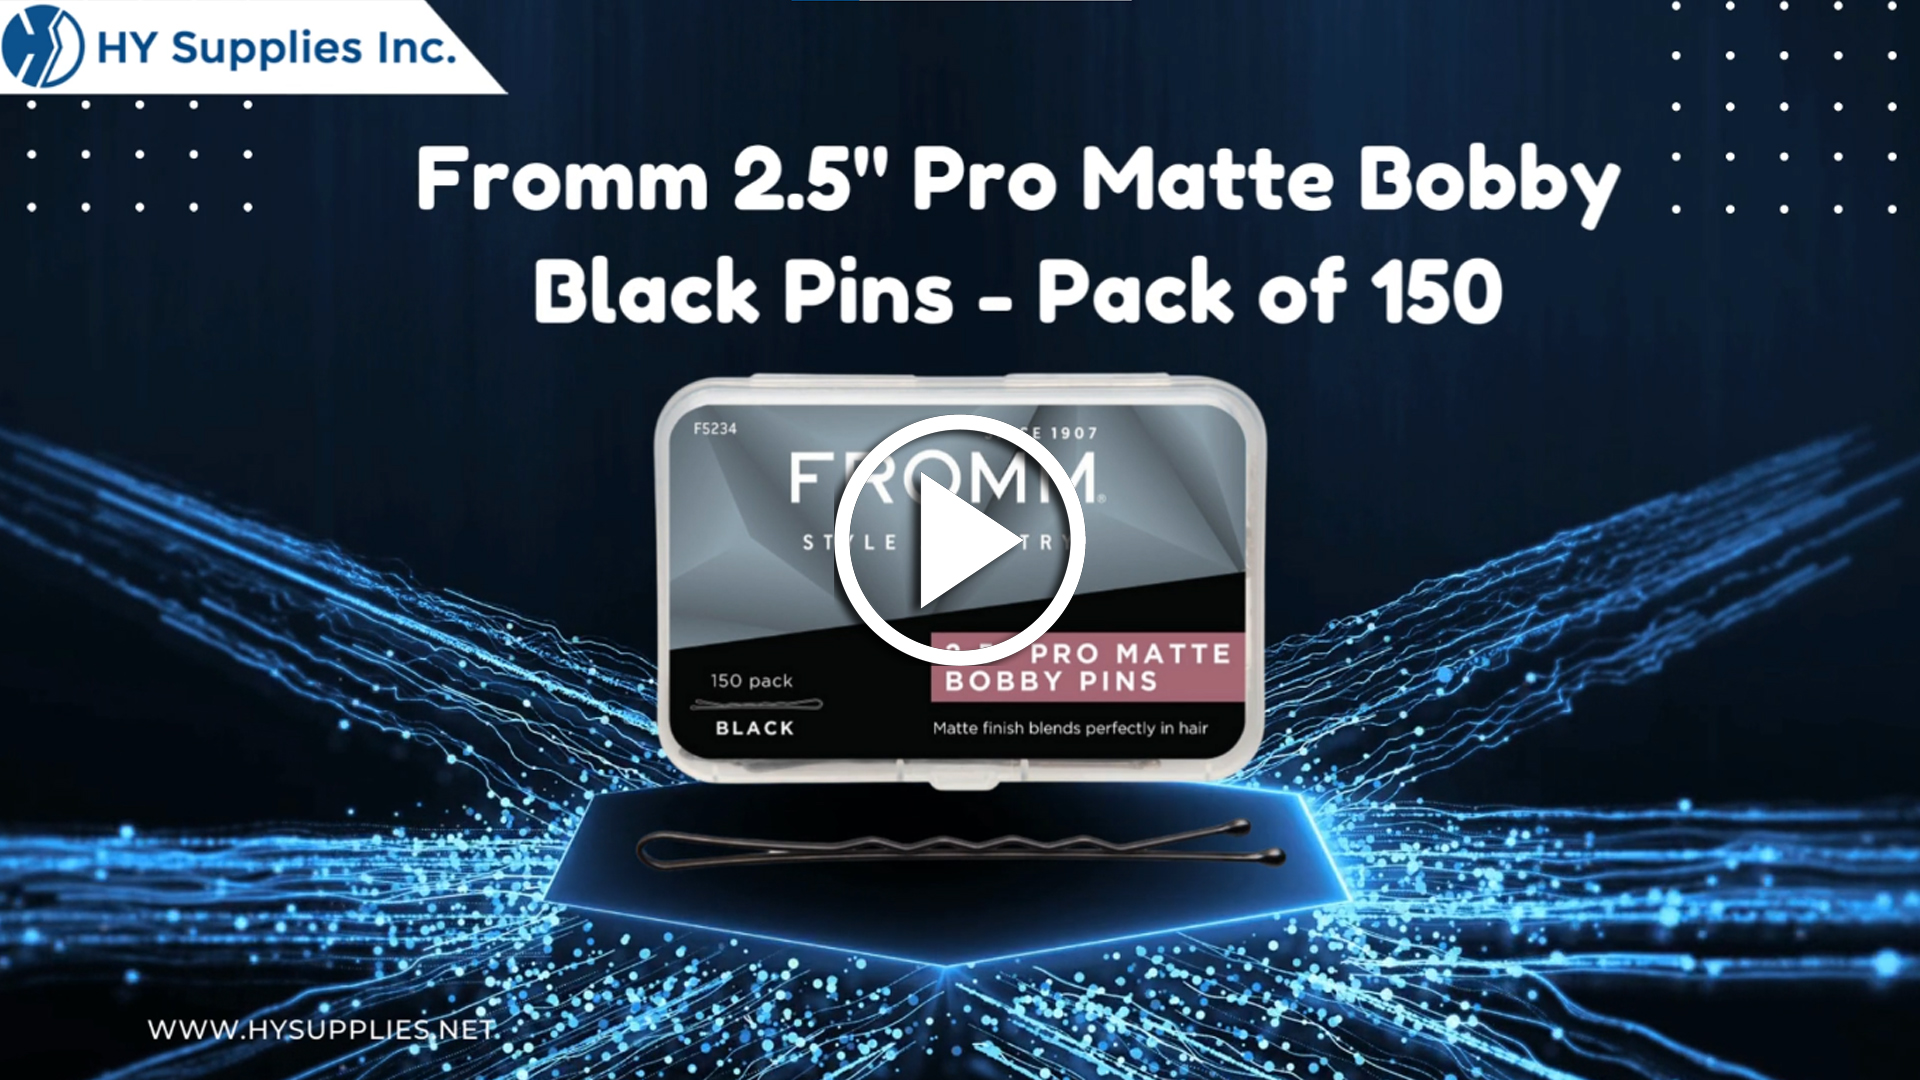 Fromm 2.5" Pro Matte Bobby Black Pins - Pack of 150